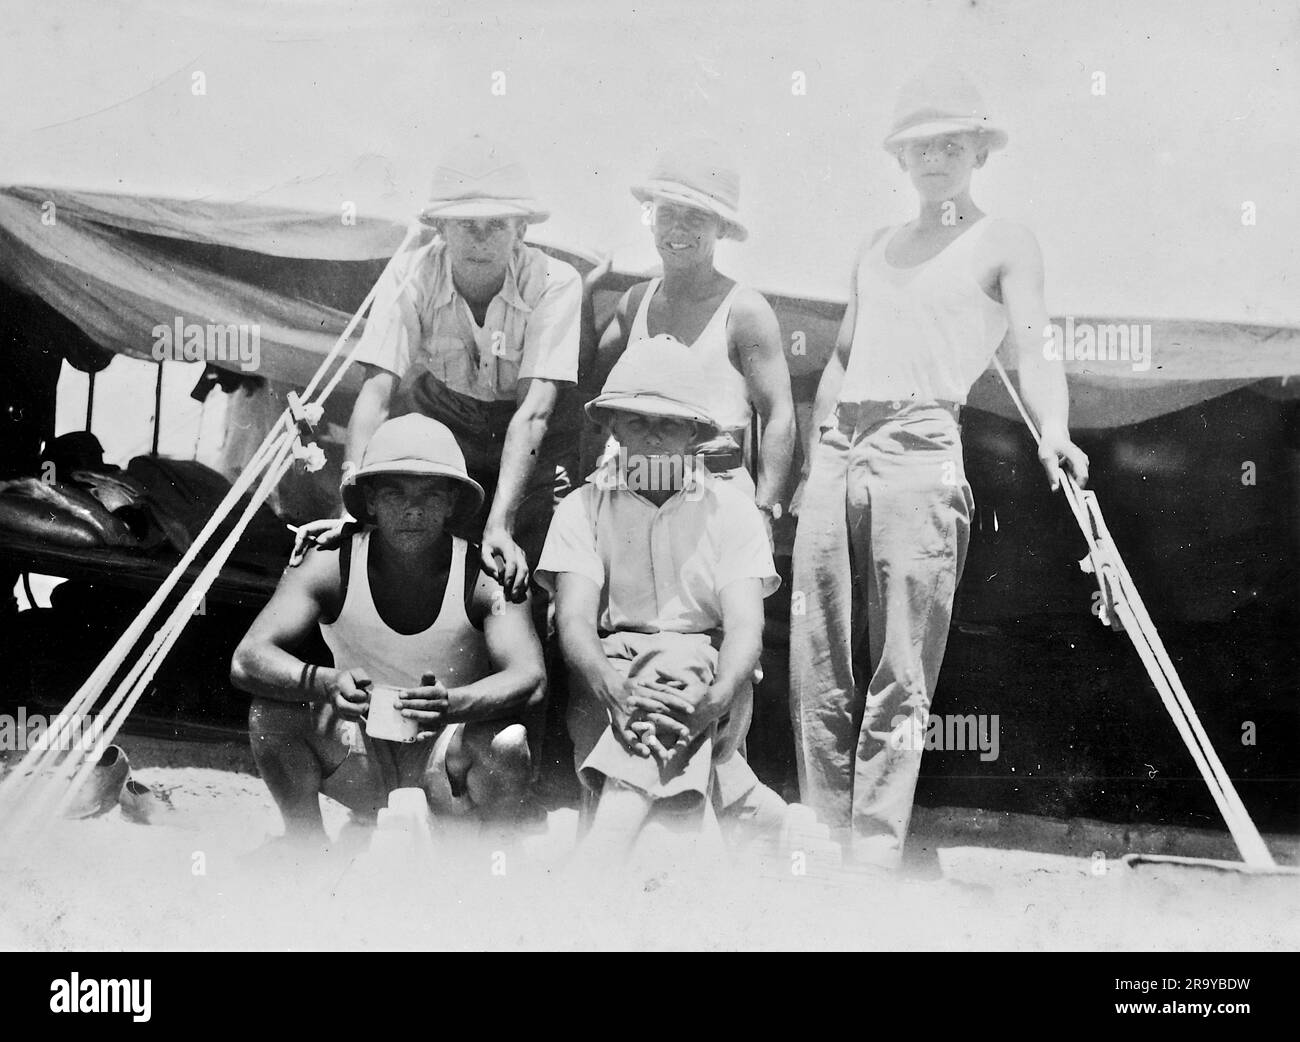 A military group beside a tent, Palestine, c1930. This is a photograph from an album of mainly snapshots, c1929, during the occupation of Palestine by the British Army, with photos from Palestine and UK including Devil's Jump near Churt in Surrey and Devil’s Punch Bowl. Training seems to be at Hursley Camp, near Winchester. Great Britain administered Palestine on behalf of the League of Nations between 1920 and 1948, a period referred to as the 'British Mandate'. Stock Photo